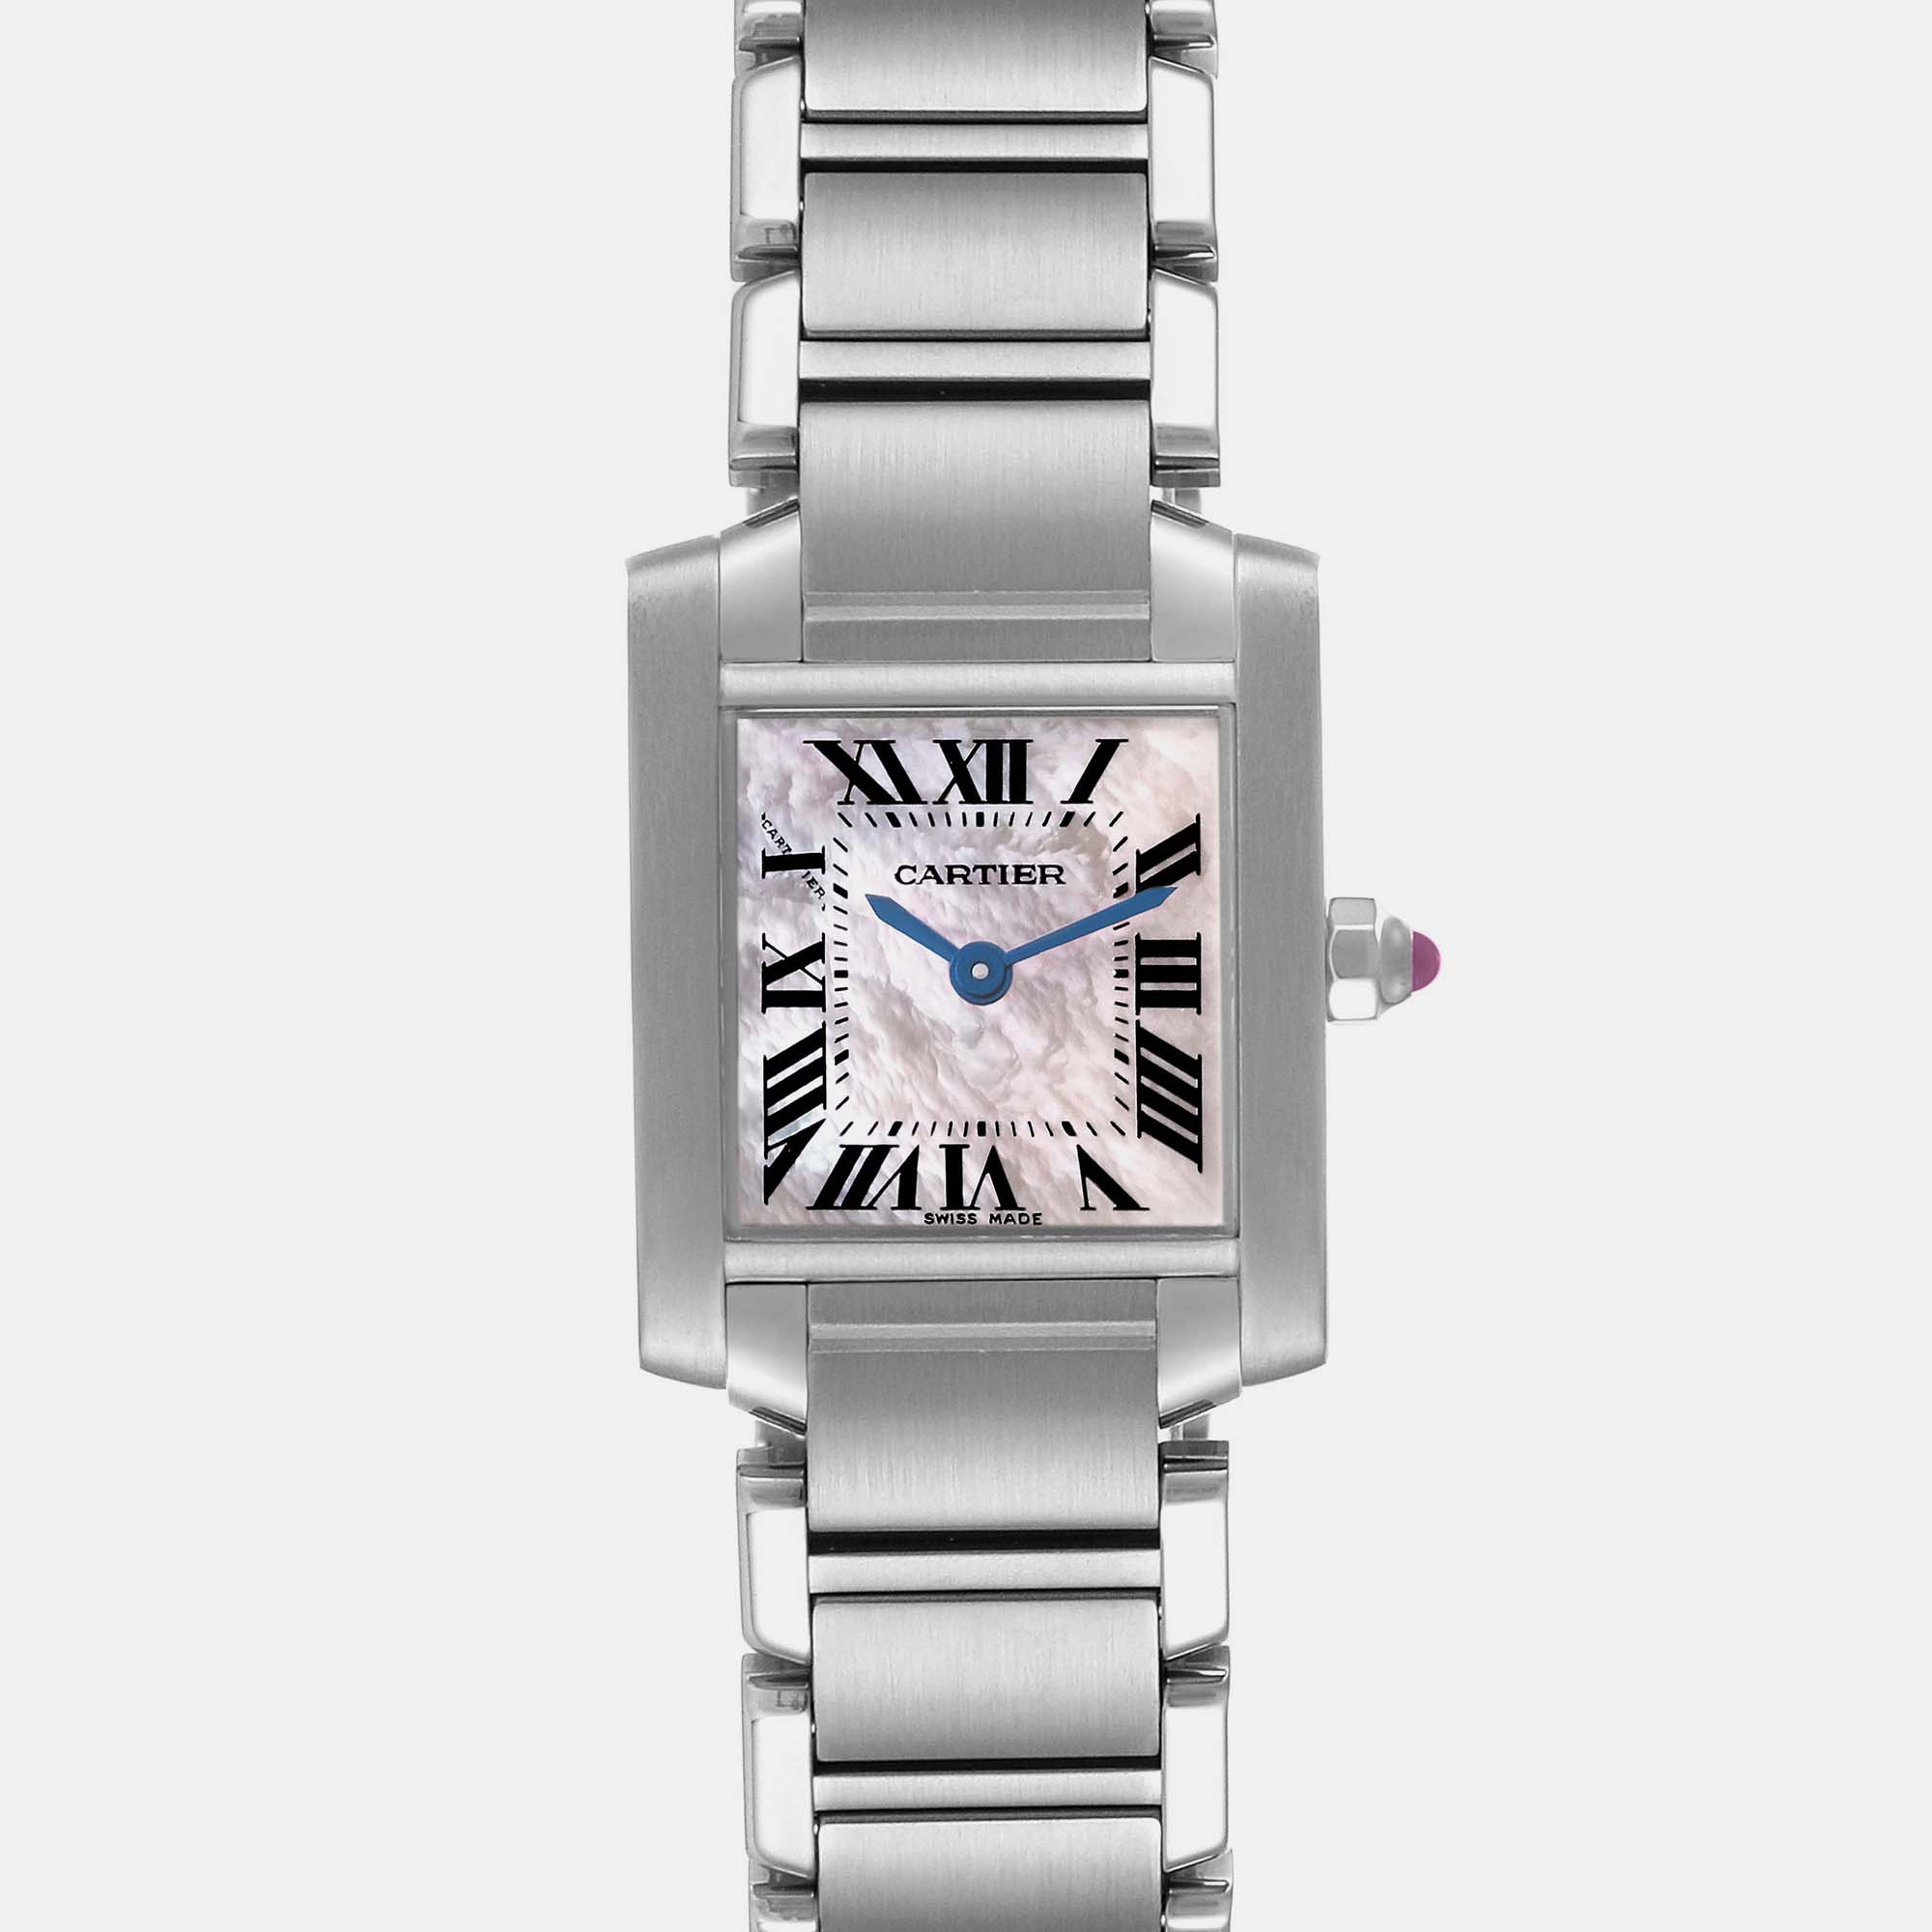 Cartier Tank Francaise Mother Of Pearl Steel Ladies Watch W51028Q3 20.0 Mm X 25.0 Mm